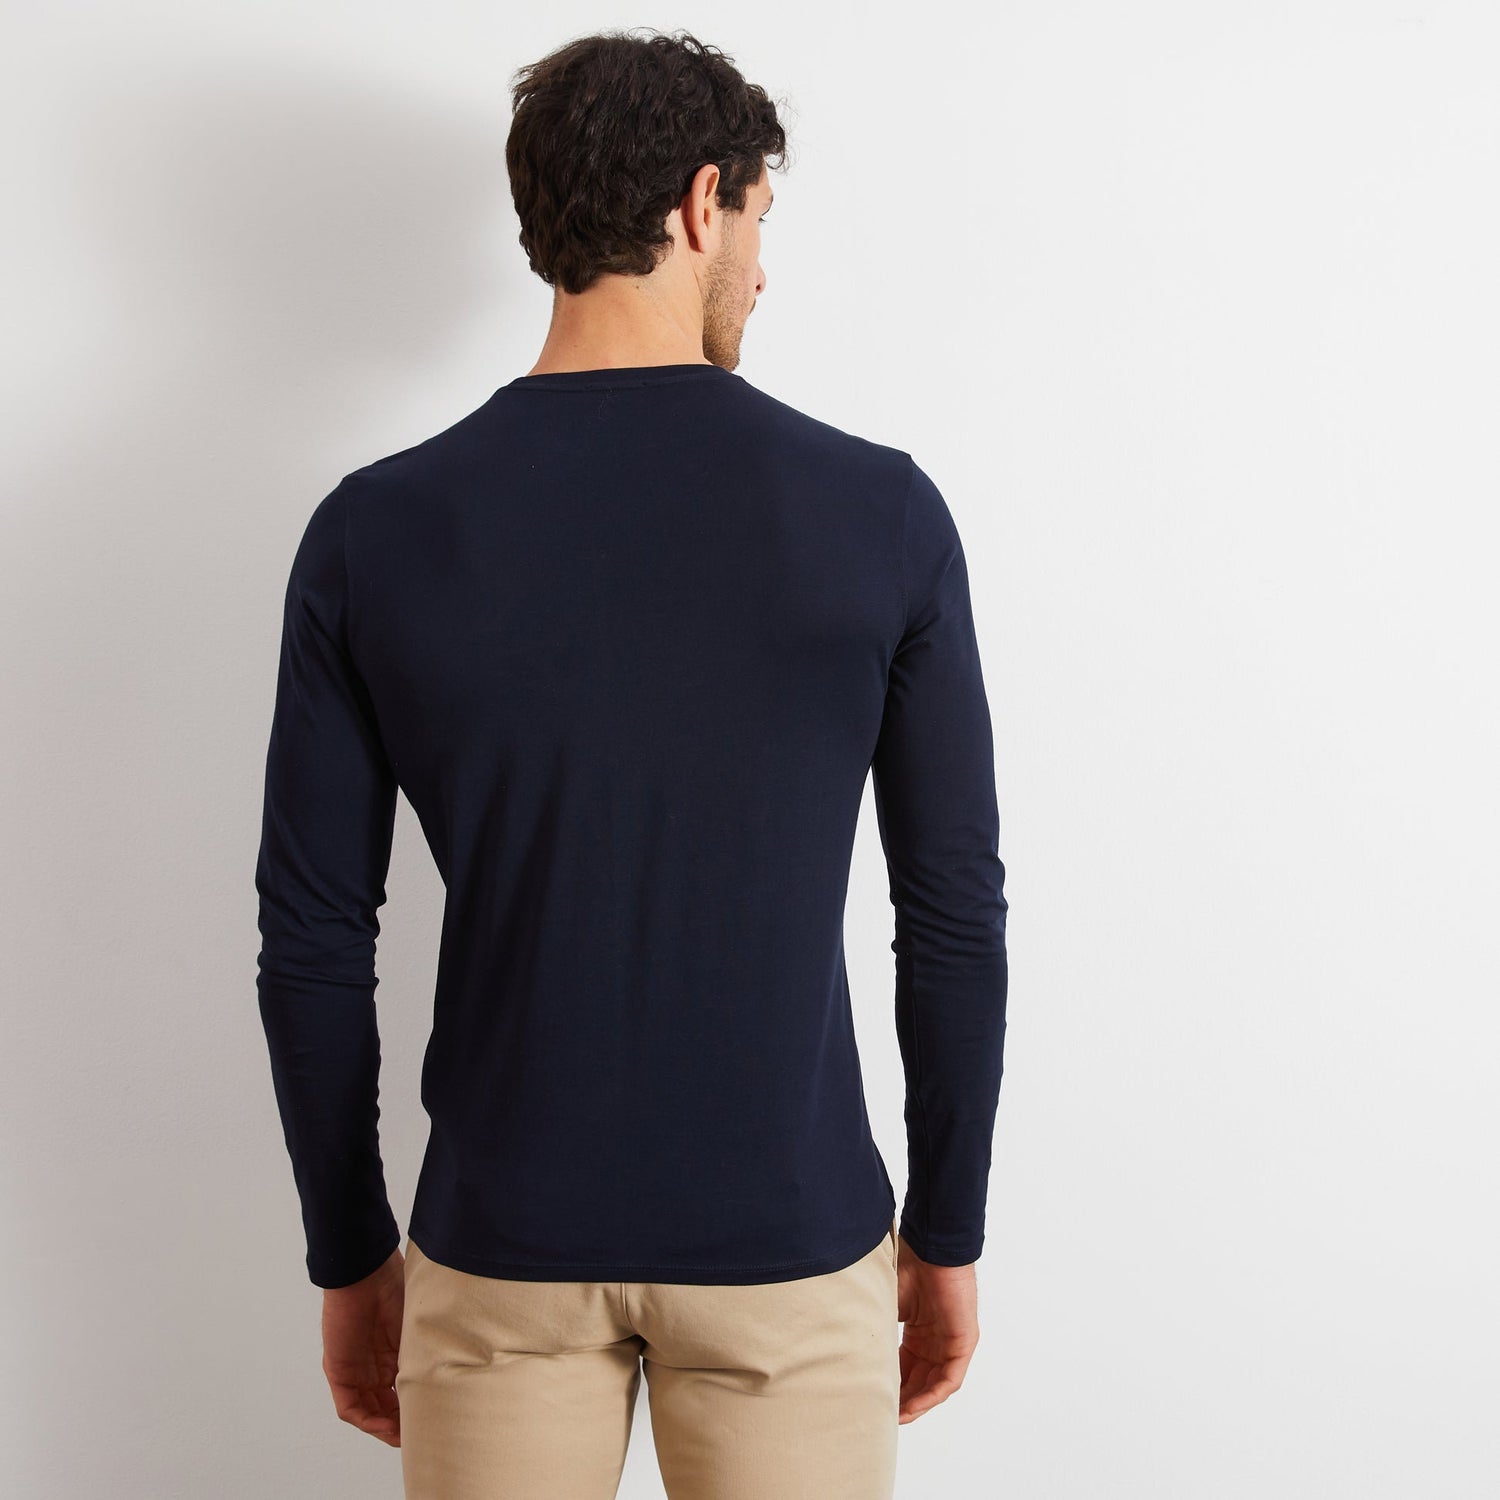 Long Sleeved Navy Blue Cotton T-Shirt_PPKNITLE0007_BLF_04